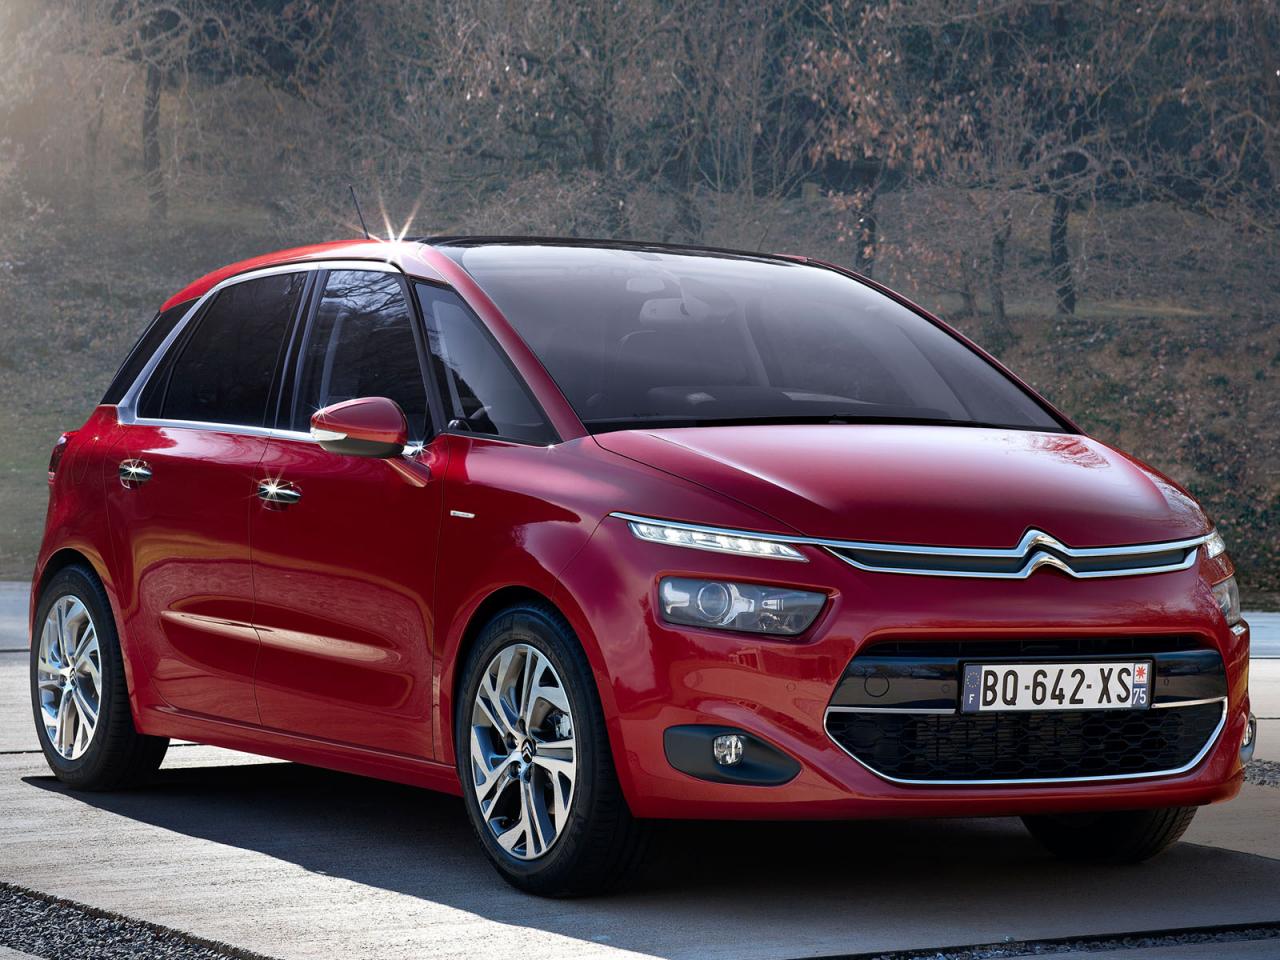 2013-citroen-c4-picasso-first-official-photos-leaked_2.jpg